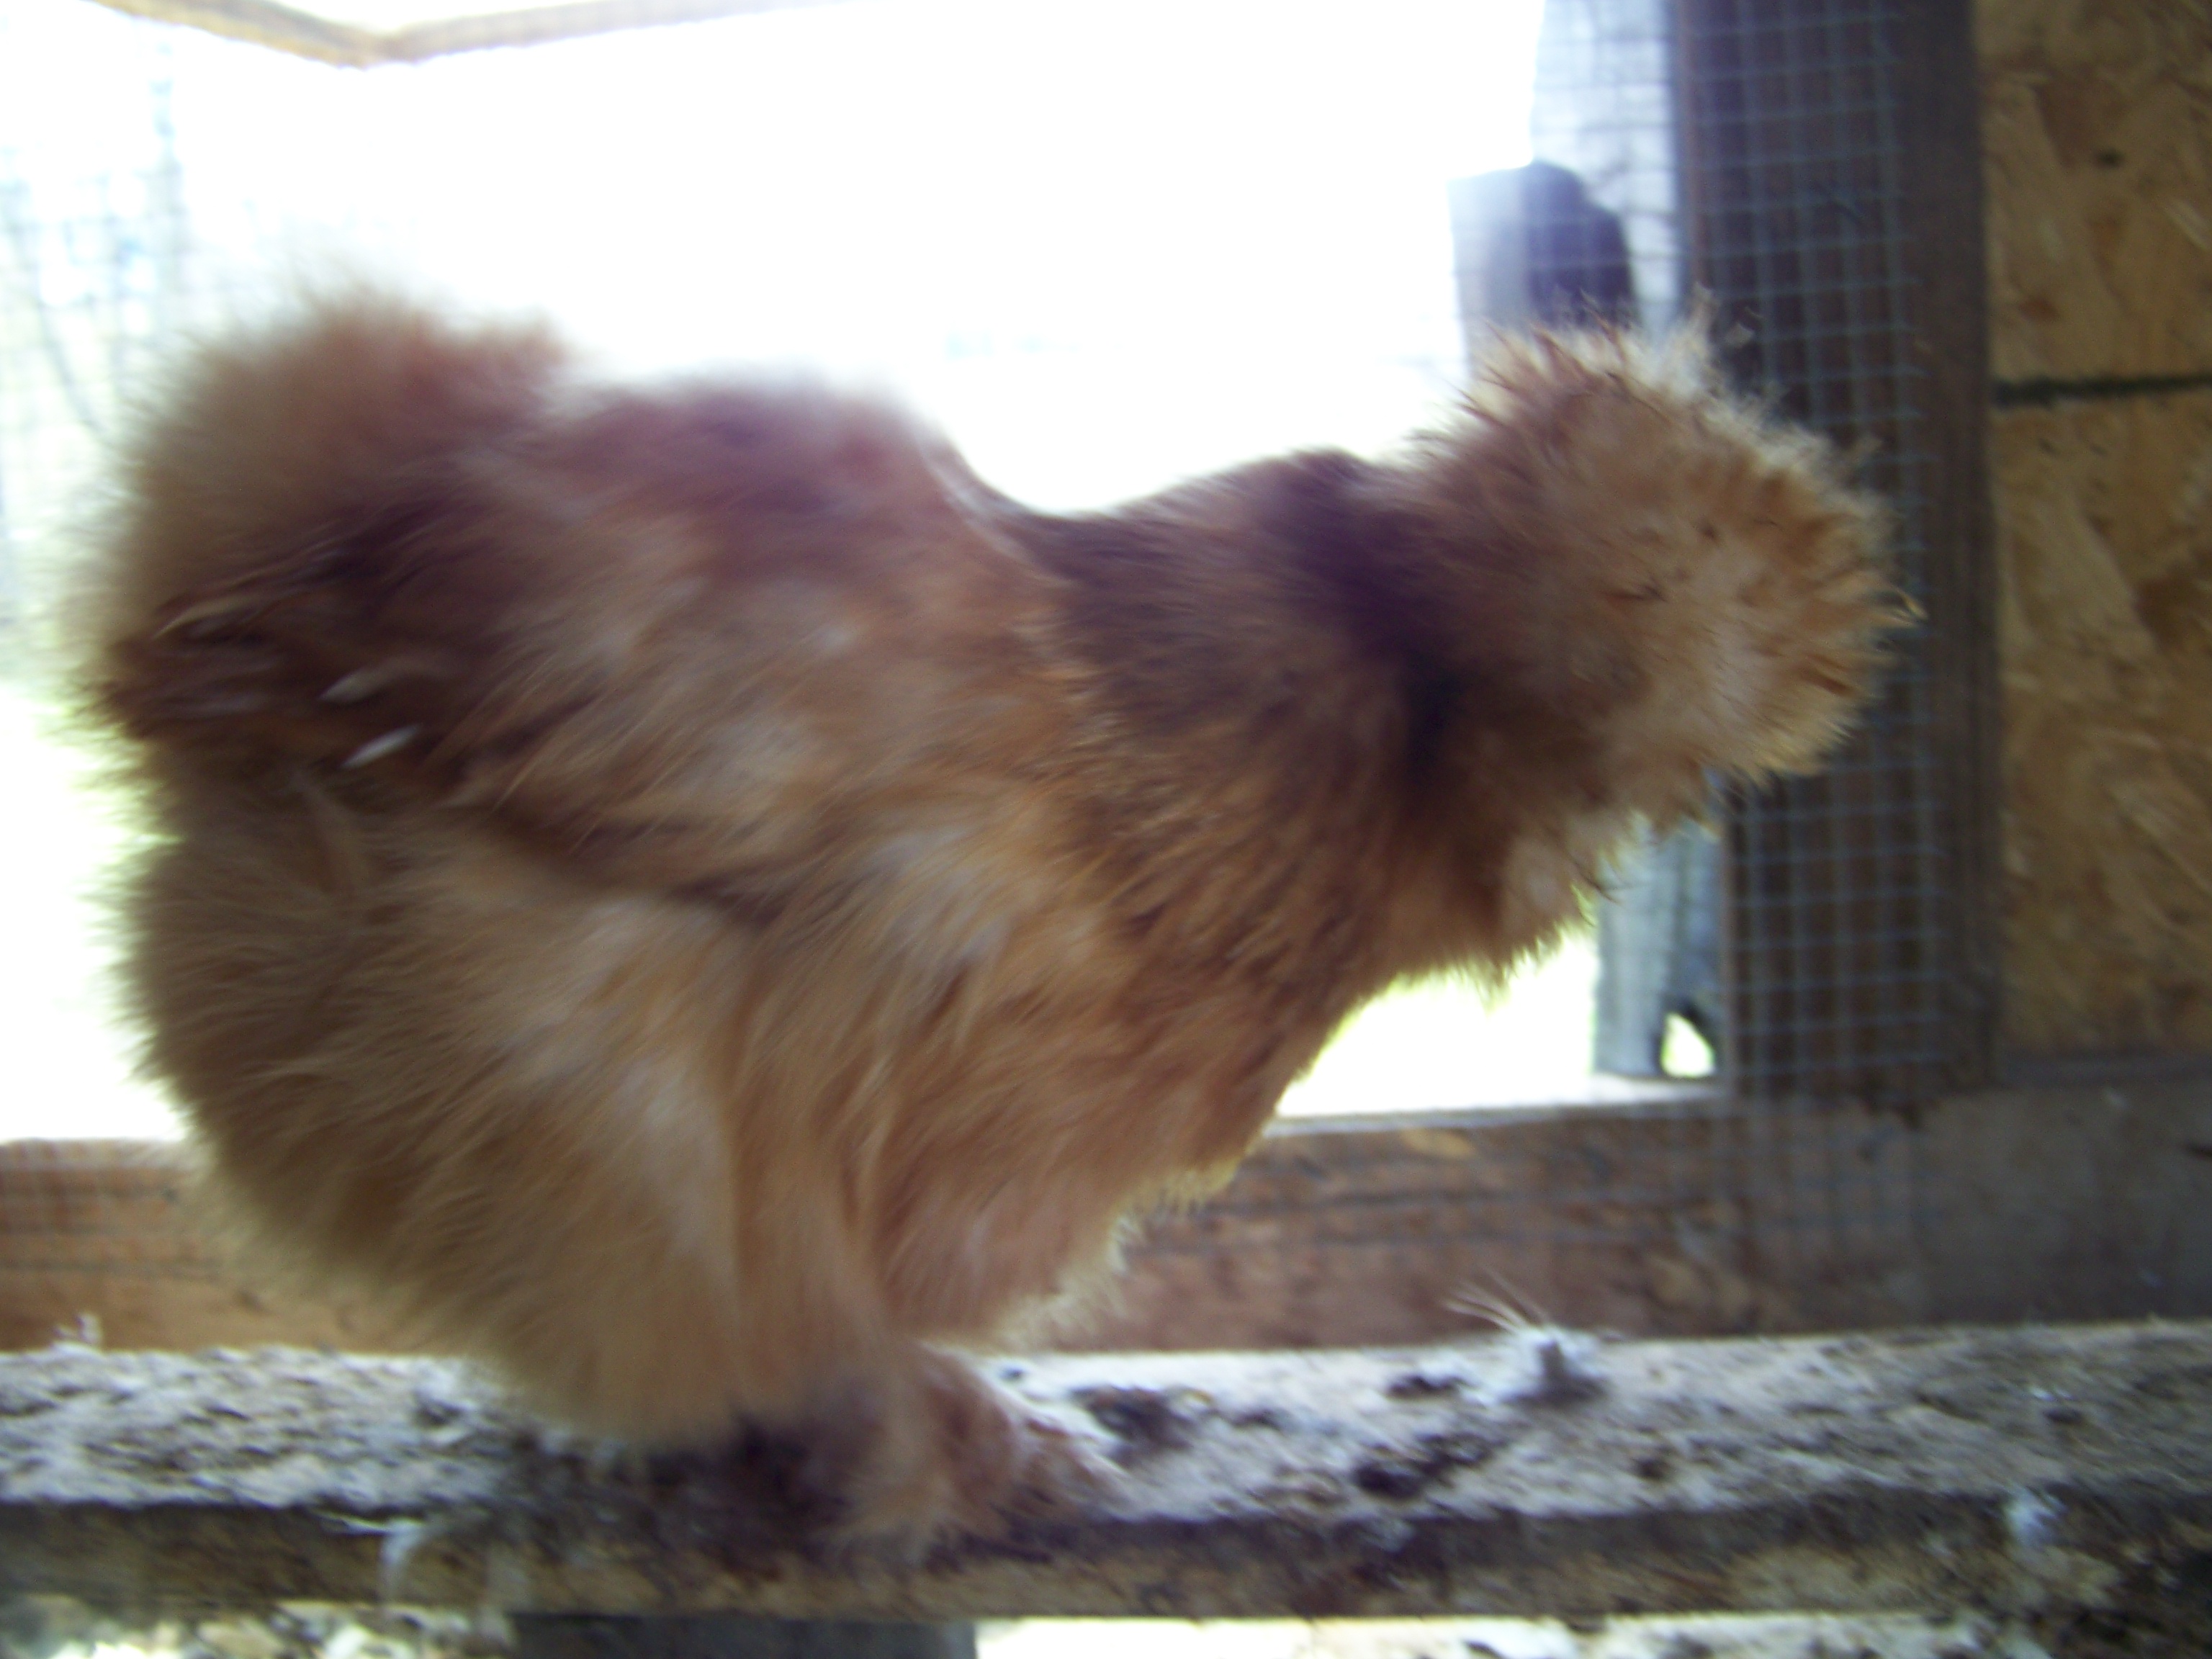 Rosie (buff Silkie hen) again. The poor thing is not photogenic at all. She's really beautiful in person. She was also a little dirty today.